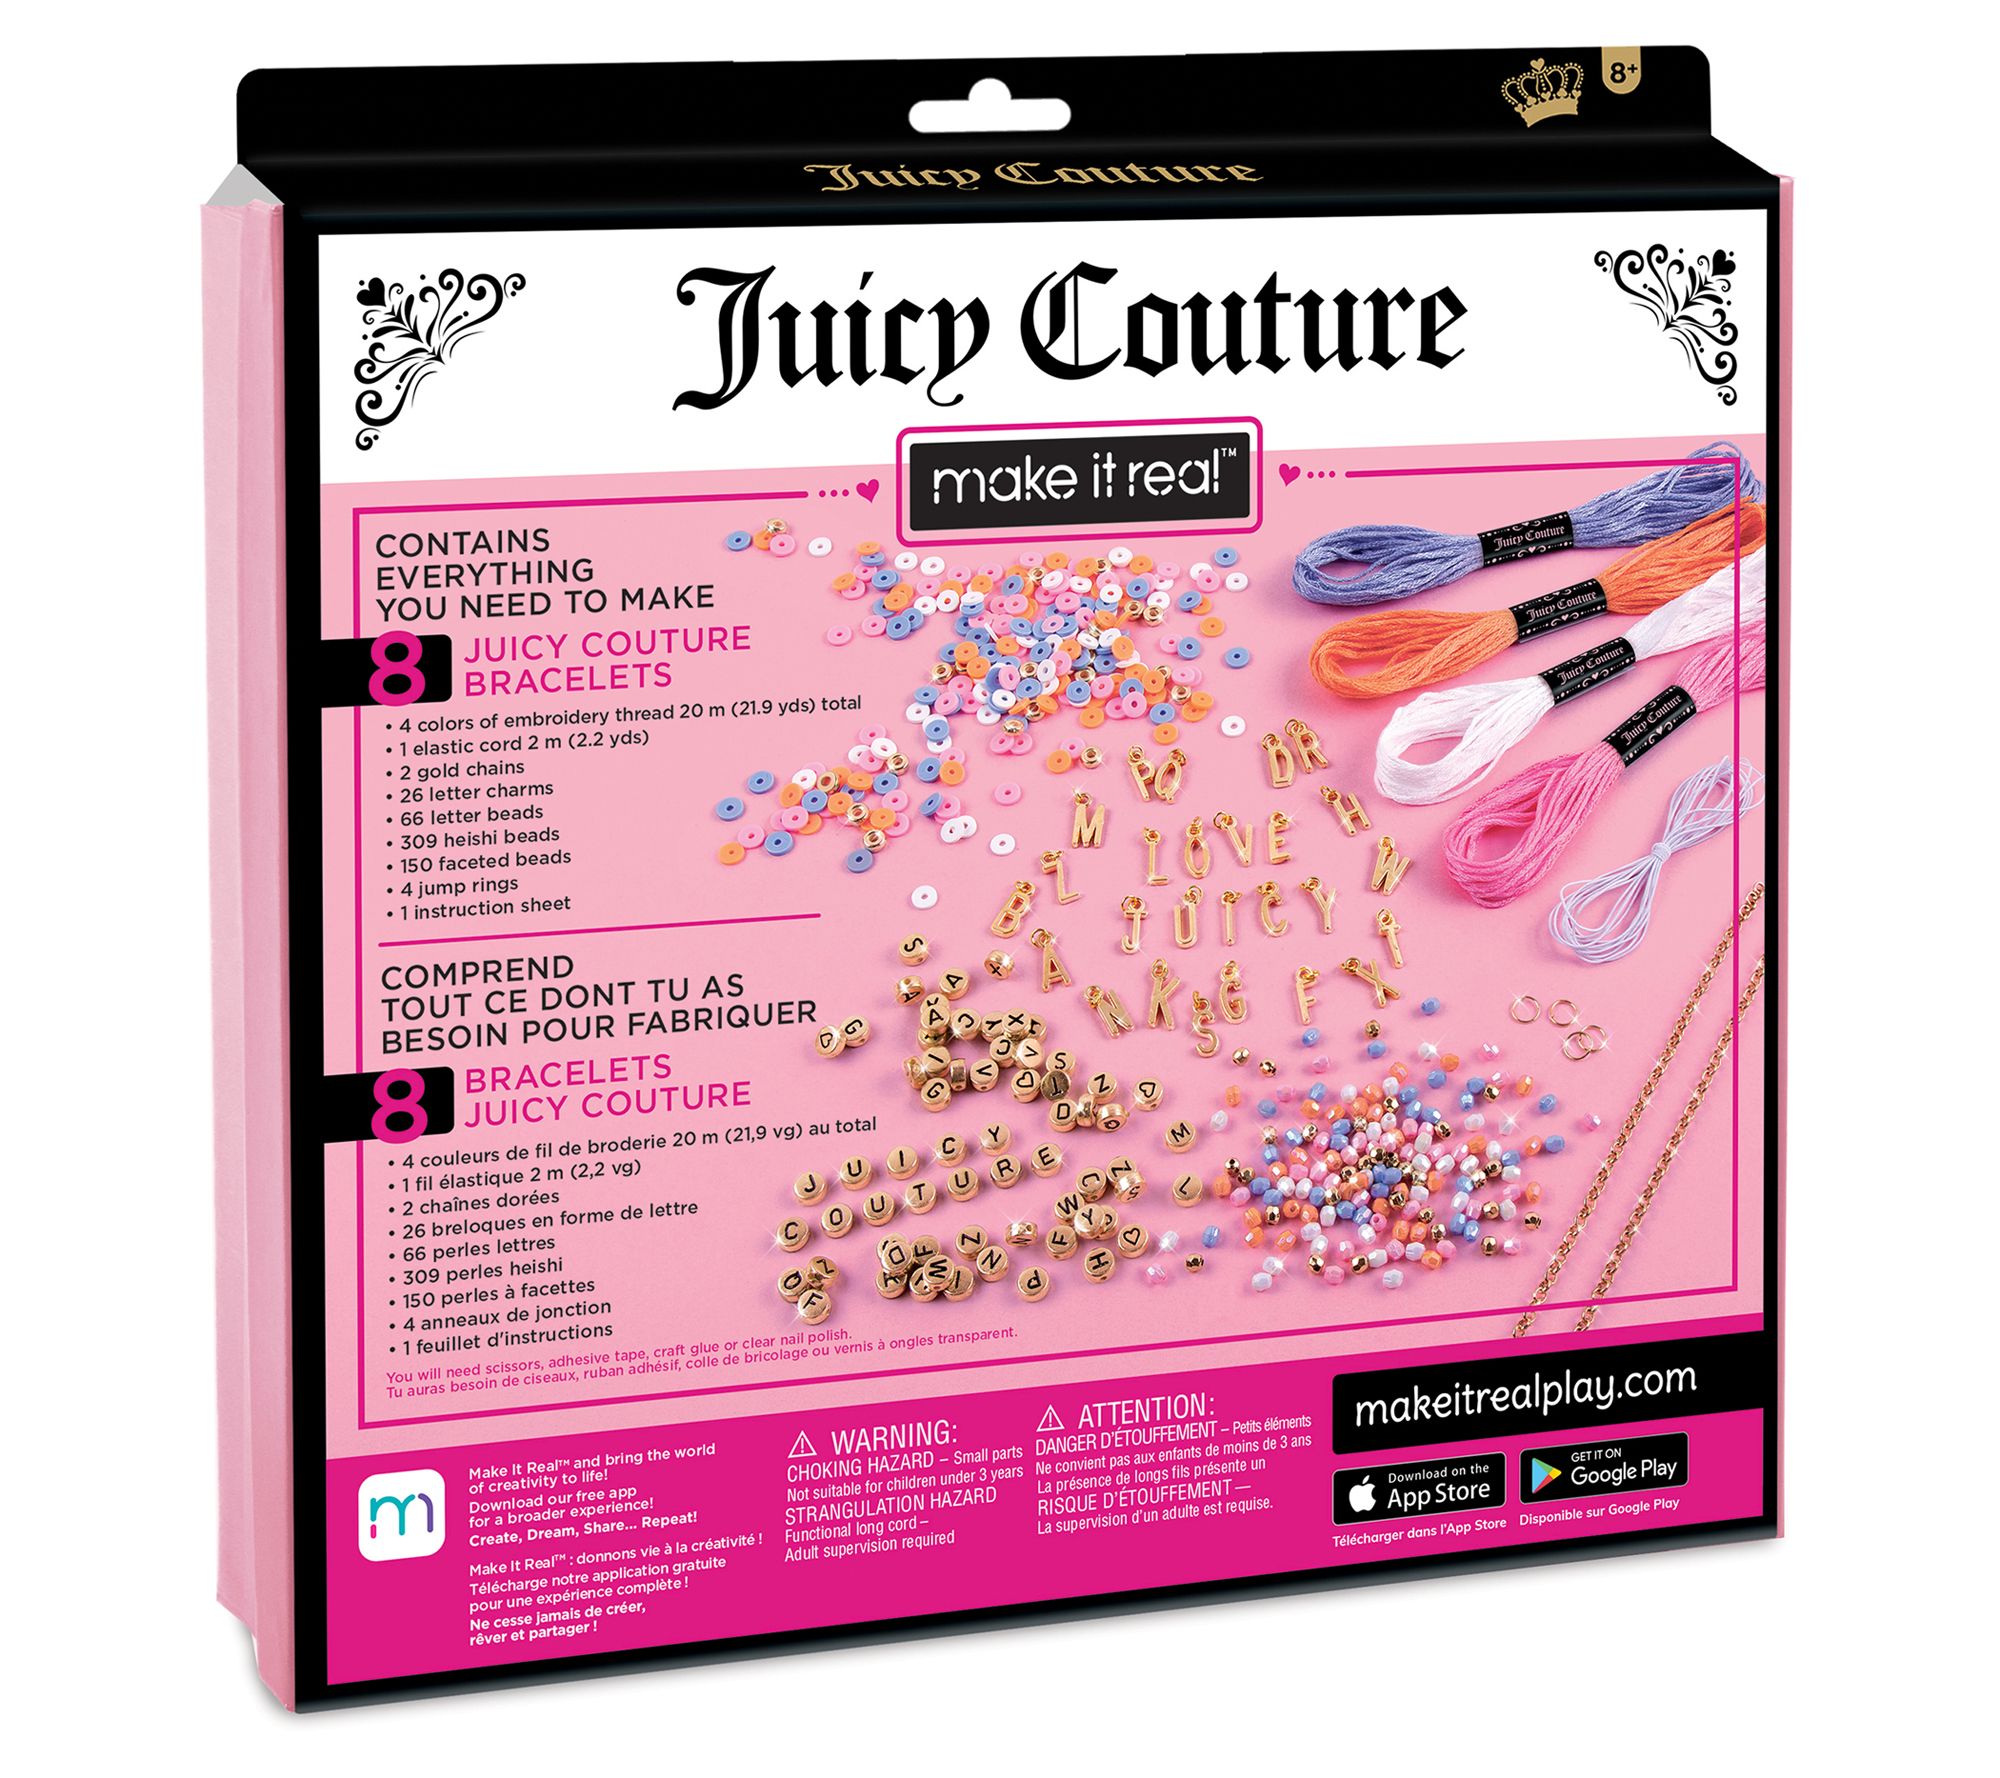 Make It Real Juicy Couture Crystal Starlight